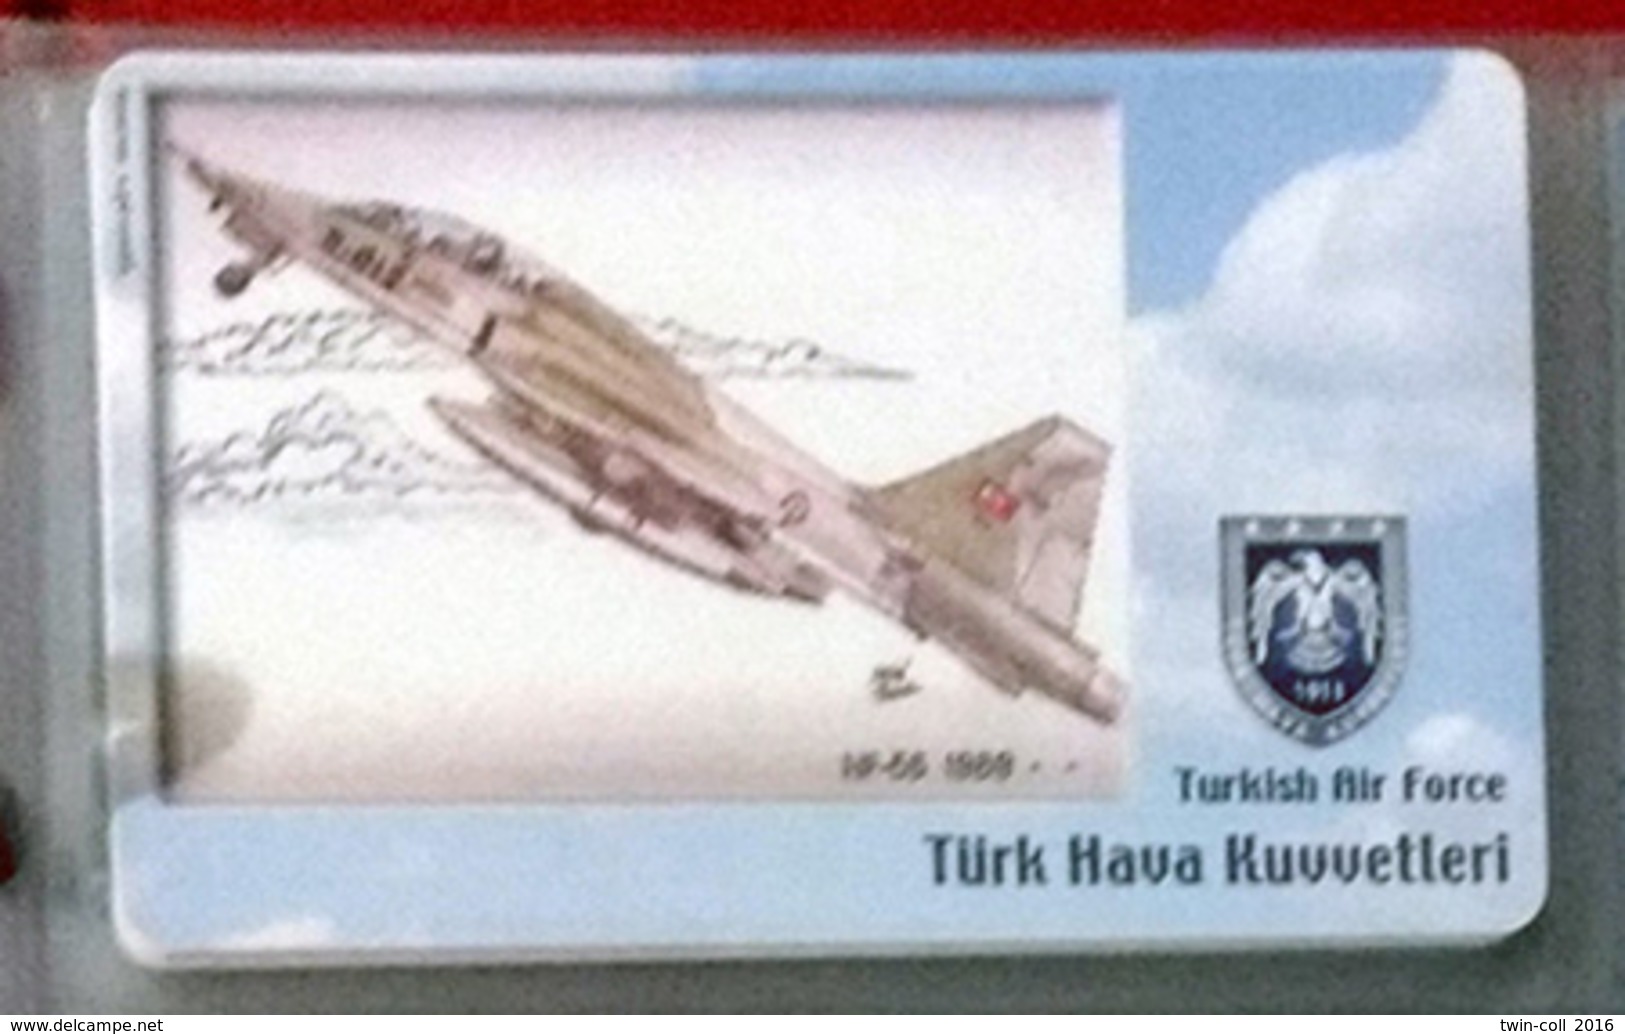 Aviation smart ( With chipset )phonecards from Turkey 47 Different